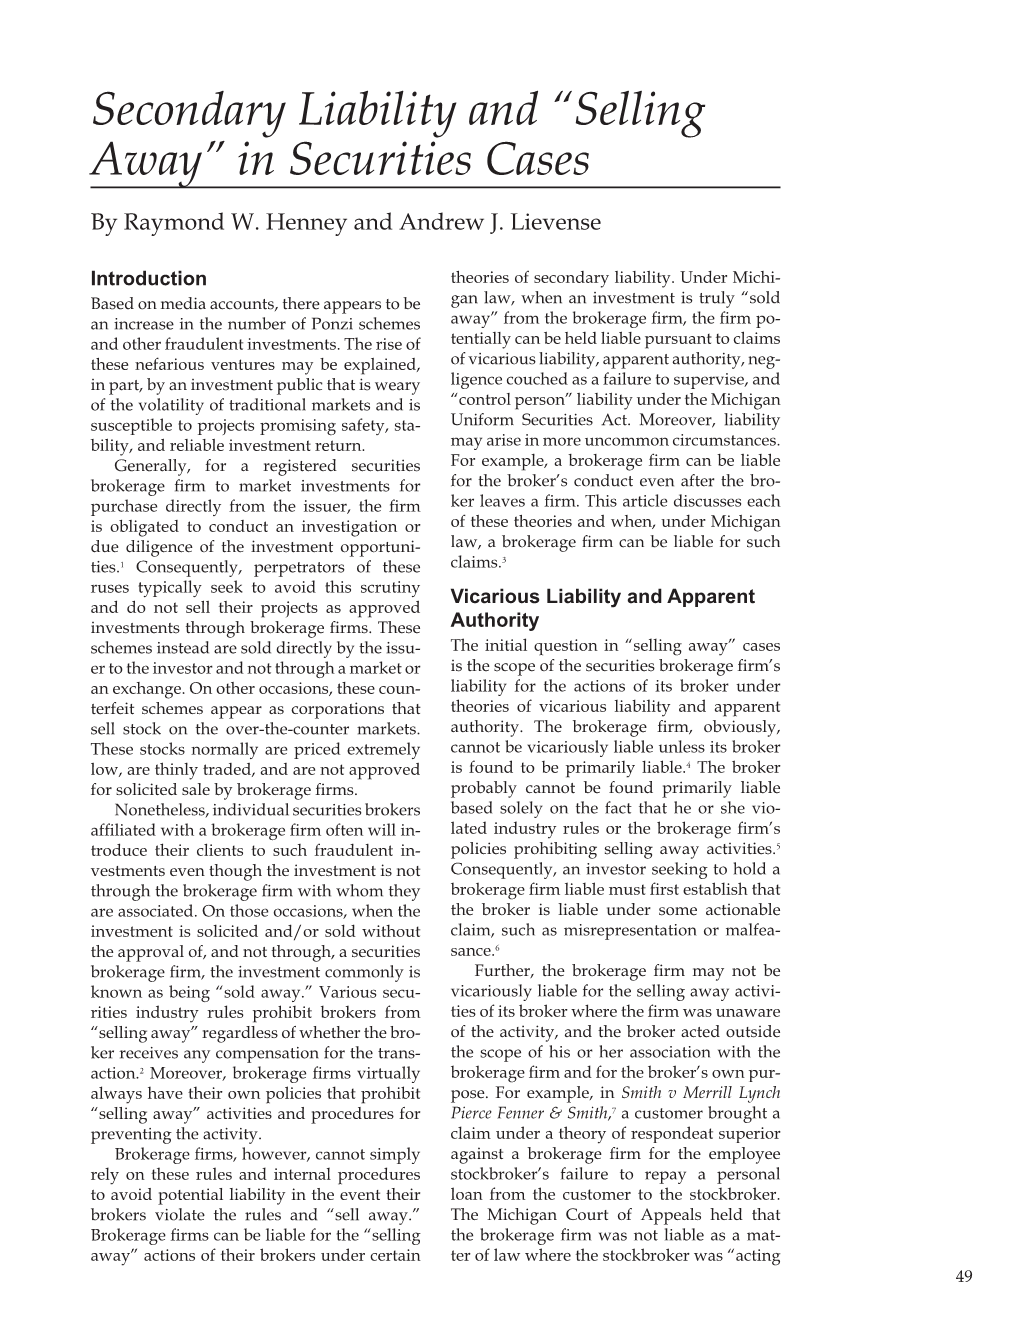 Secondary Liability and “Selling Away” in Securities Cases